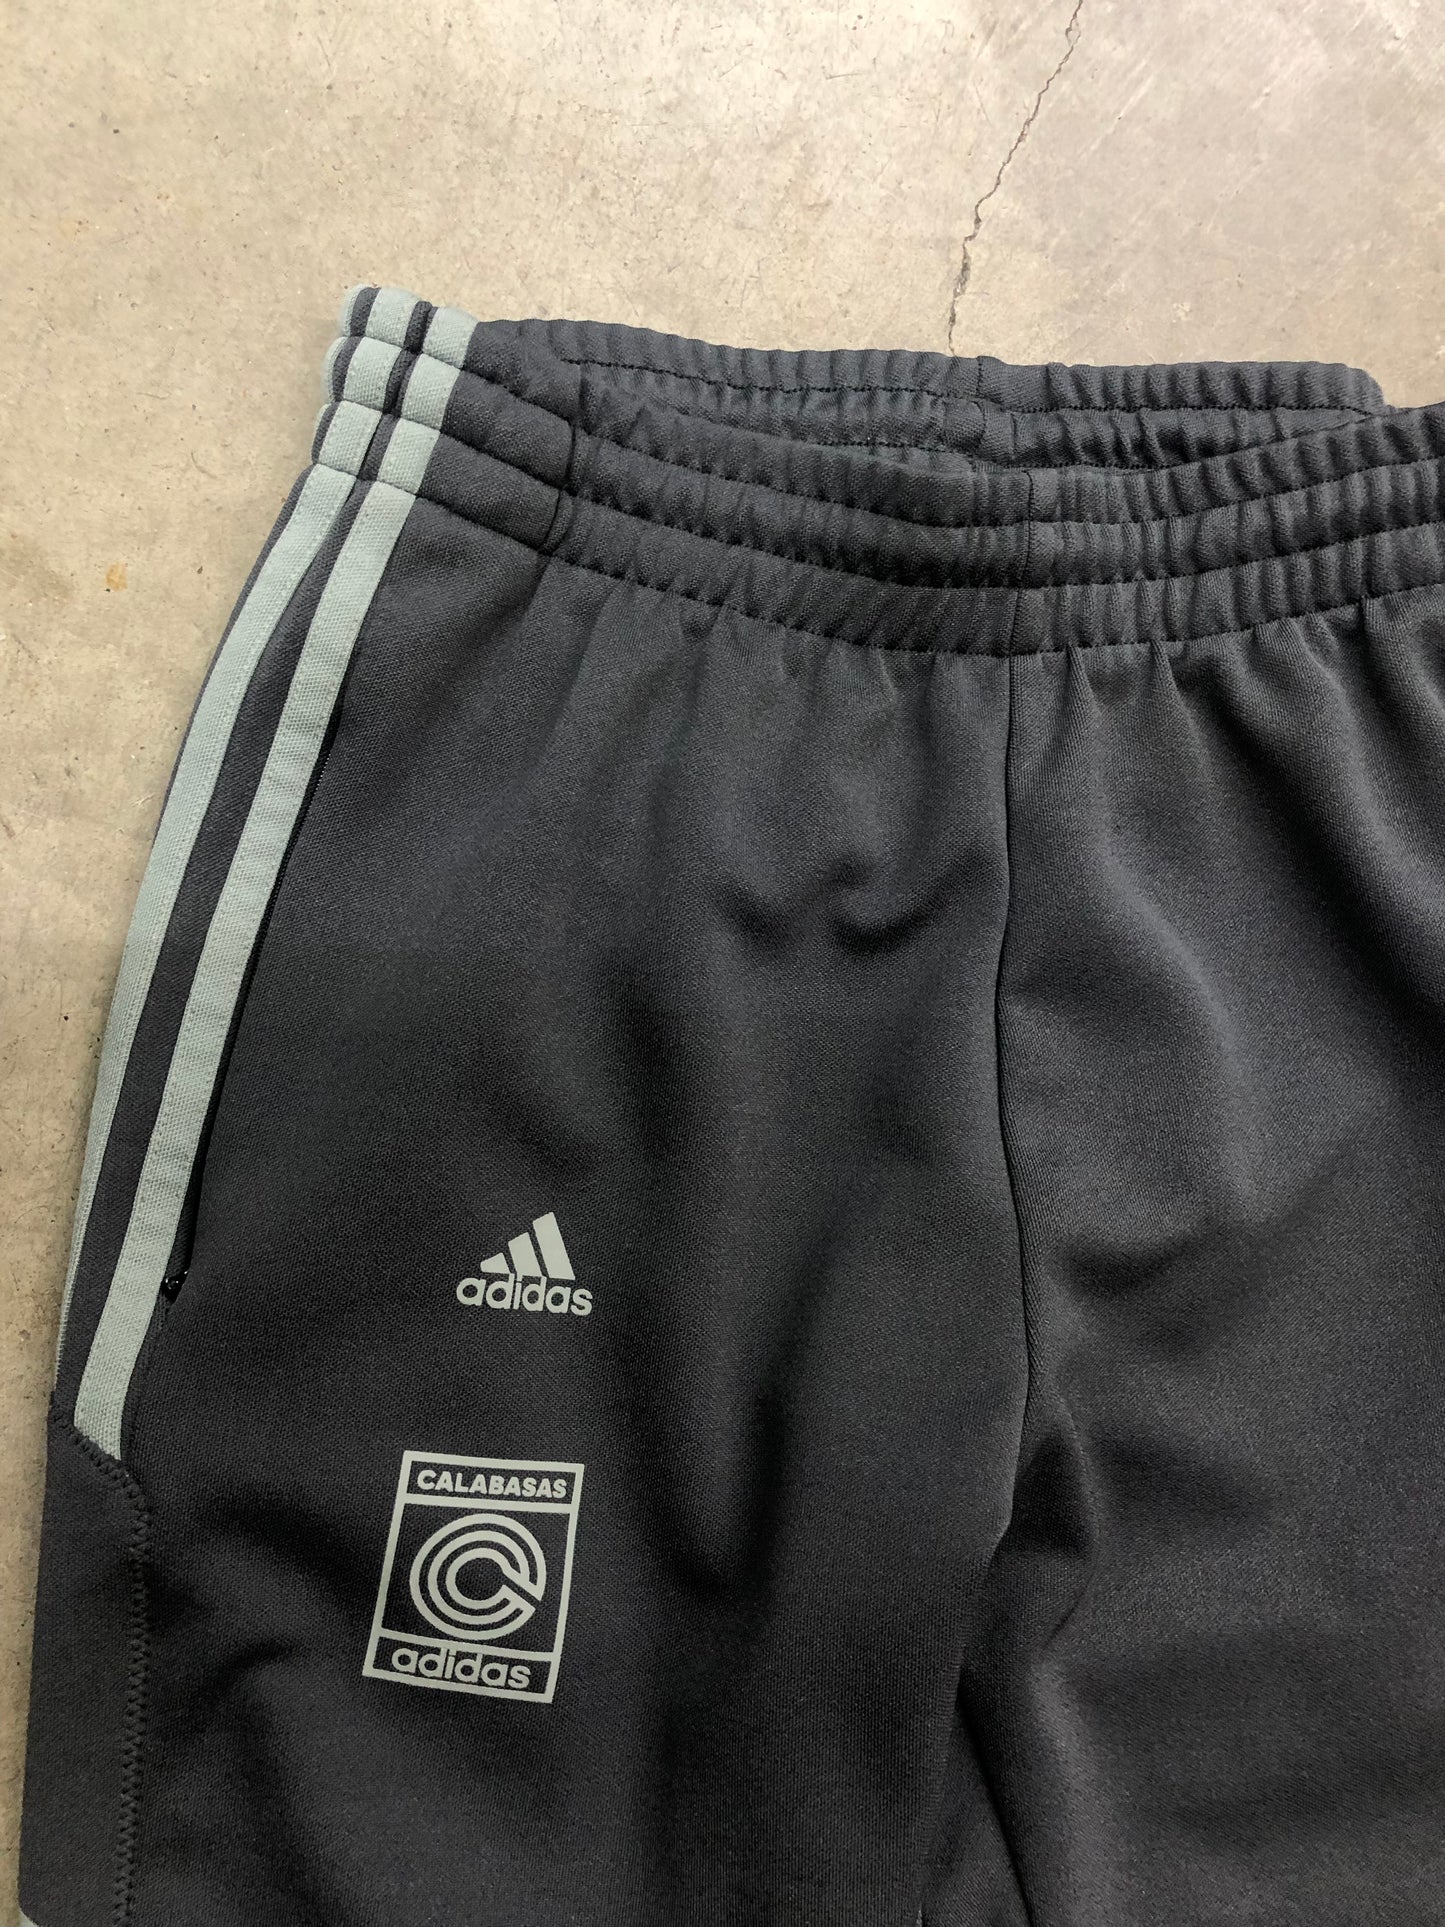 Load image into Gallery viewer, VTG Adidas Yeezy Calabasas Track Pant Sz 28x29
